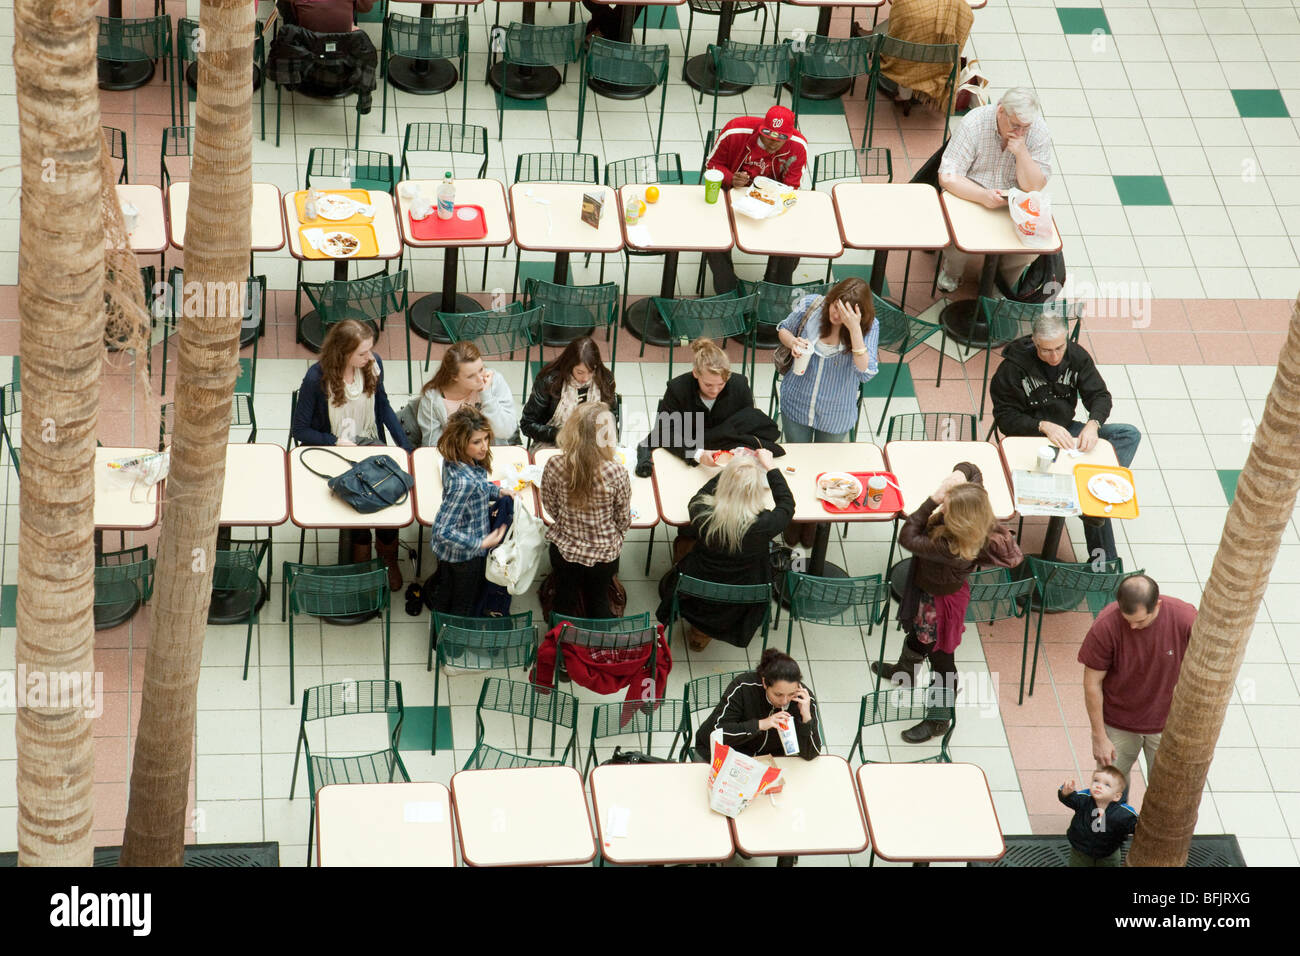 People eating at a cafe from above overhead, Pentagon City shopping mall, Washington DC, USA Stock Photo